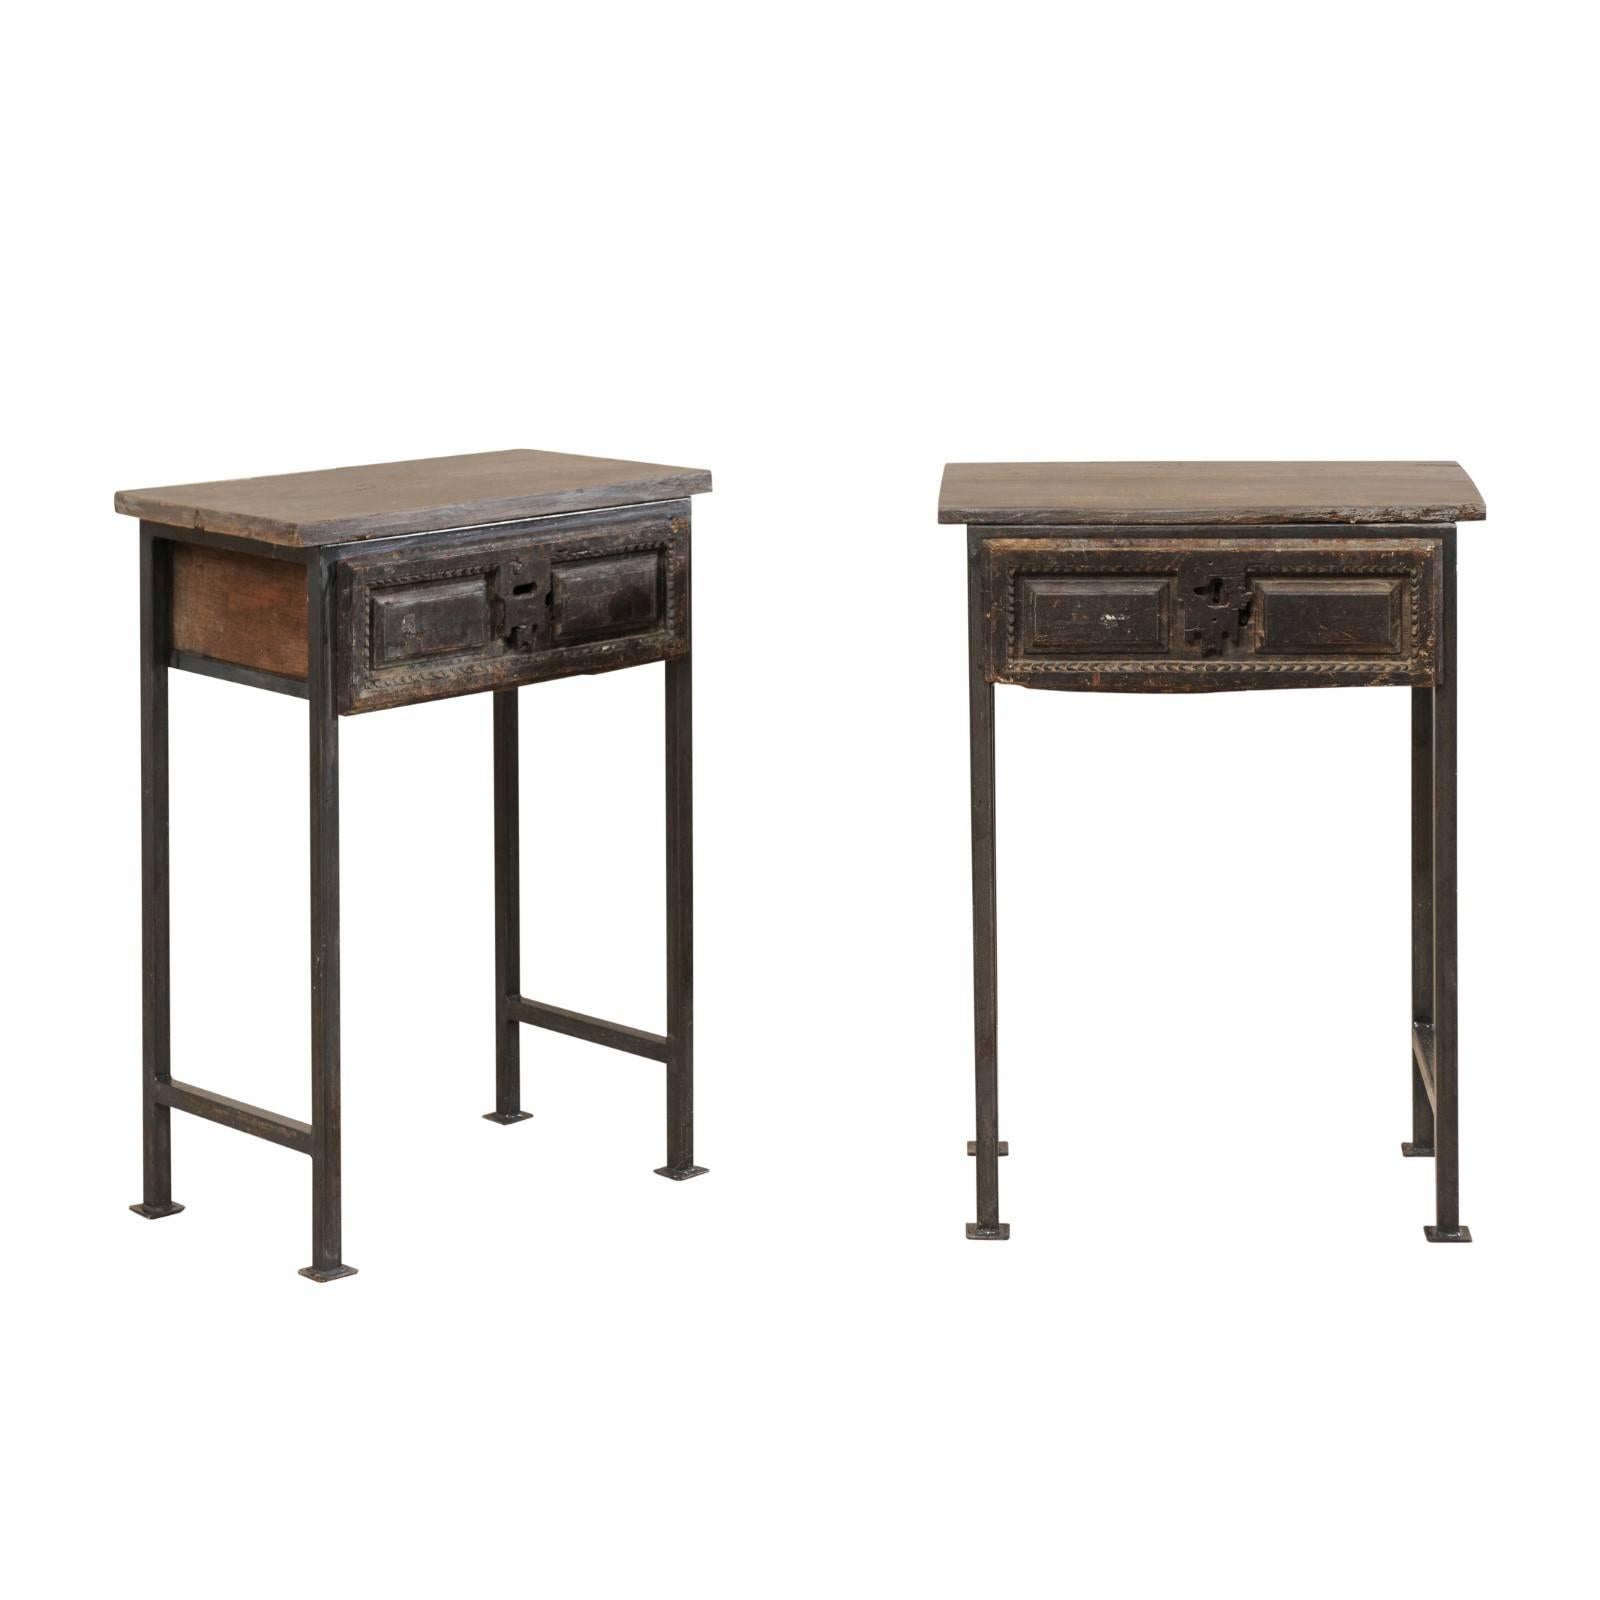 Pair of Spanish 18th Century Single Drawer Wood Side Tables on Iron Legs